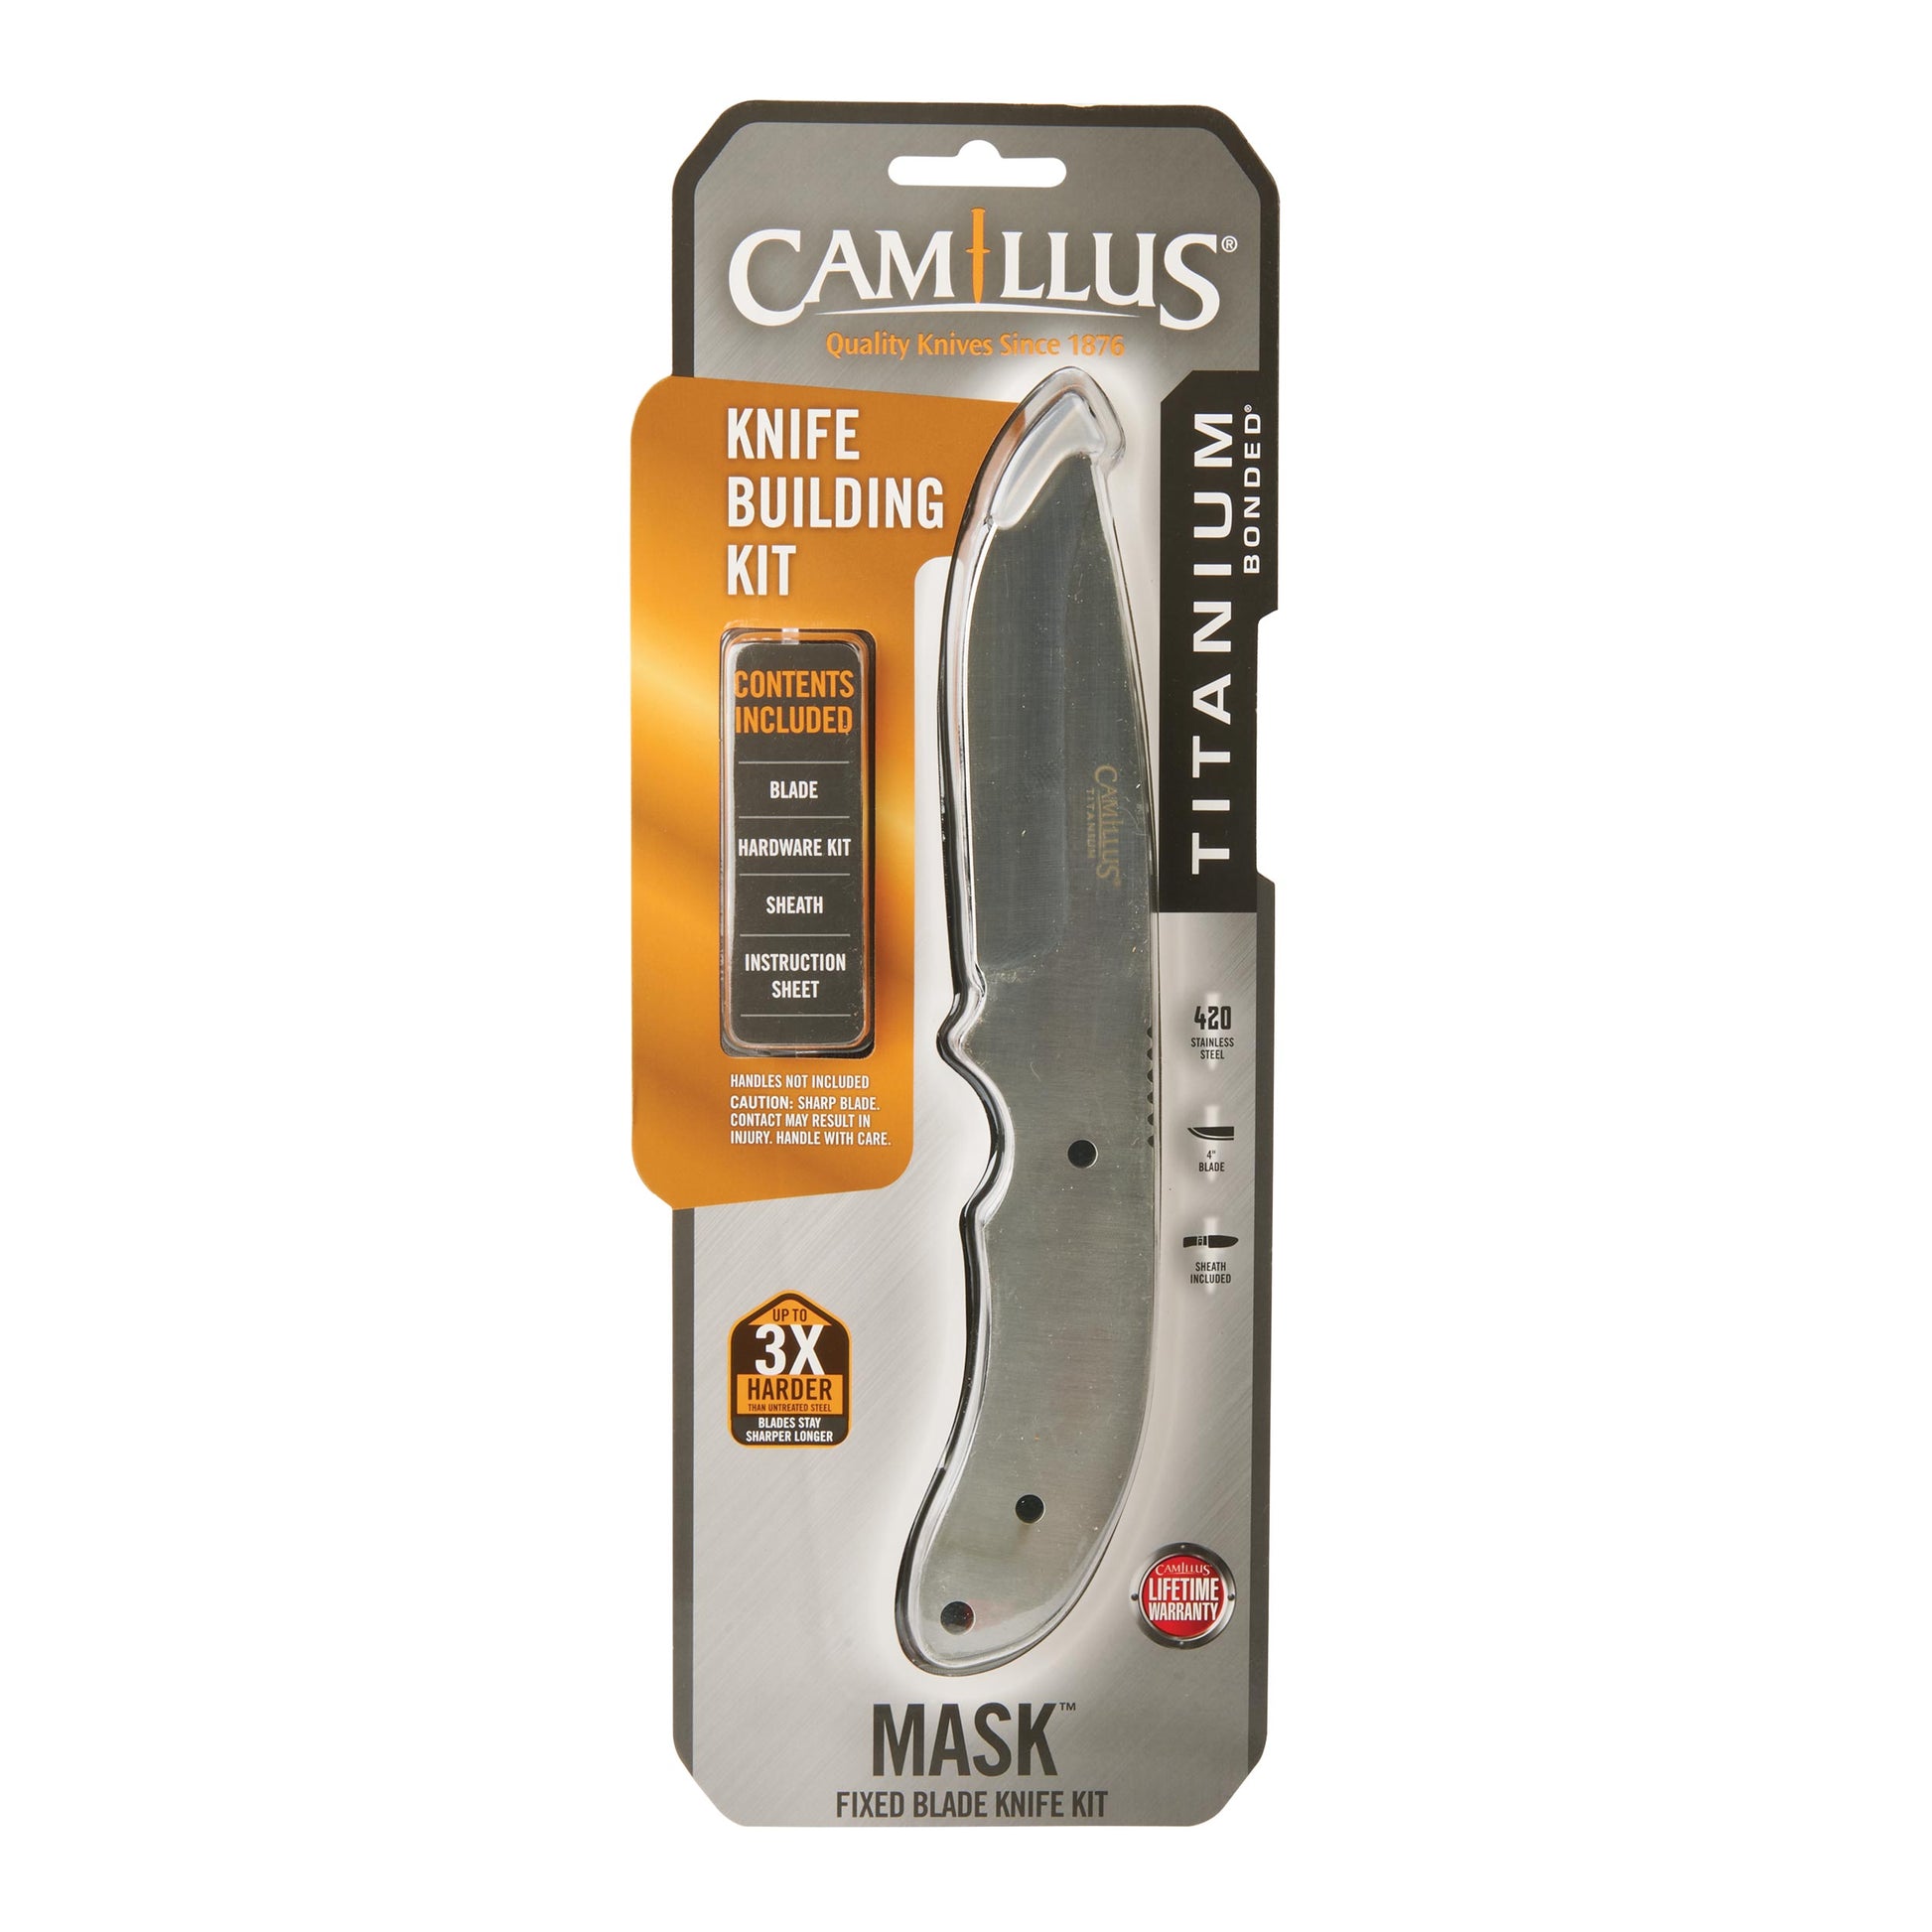 Camillus Mask Fixed Blade Knife for Hunting and Fishing - 9 - Unfinished  Kit